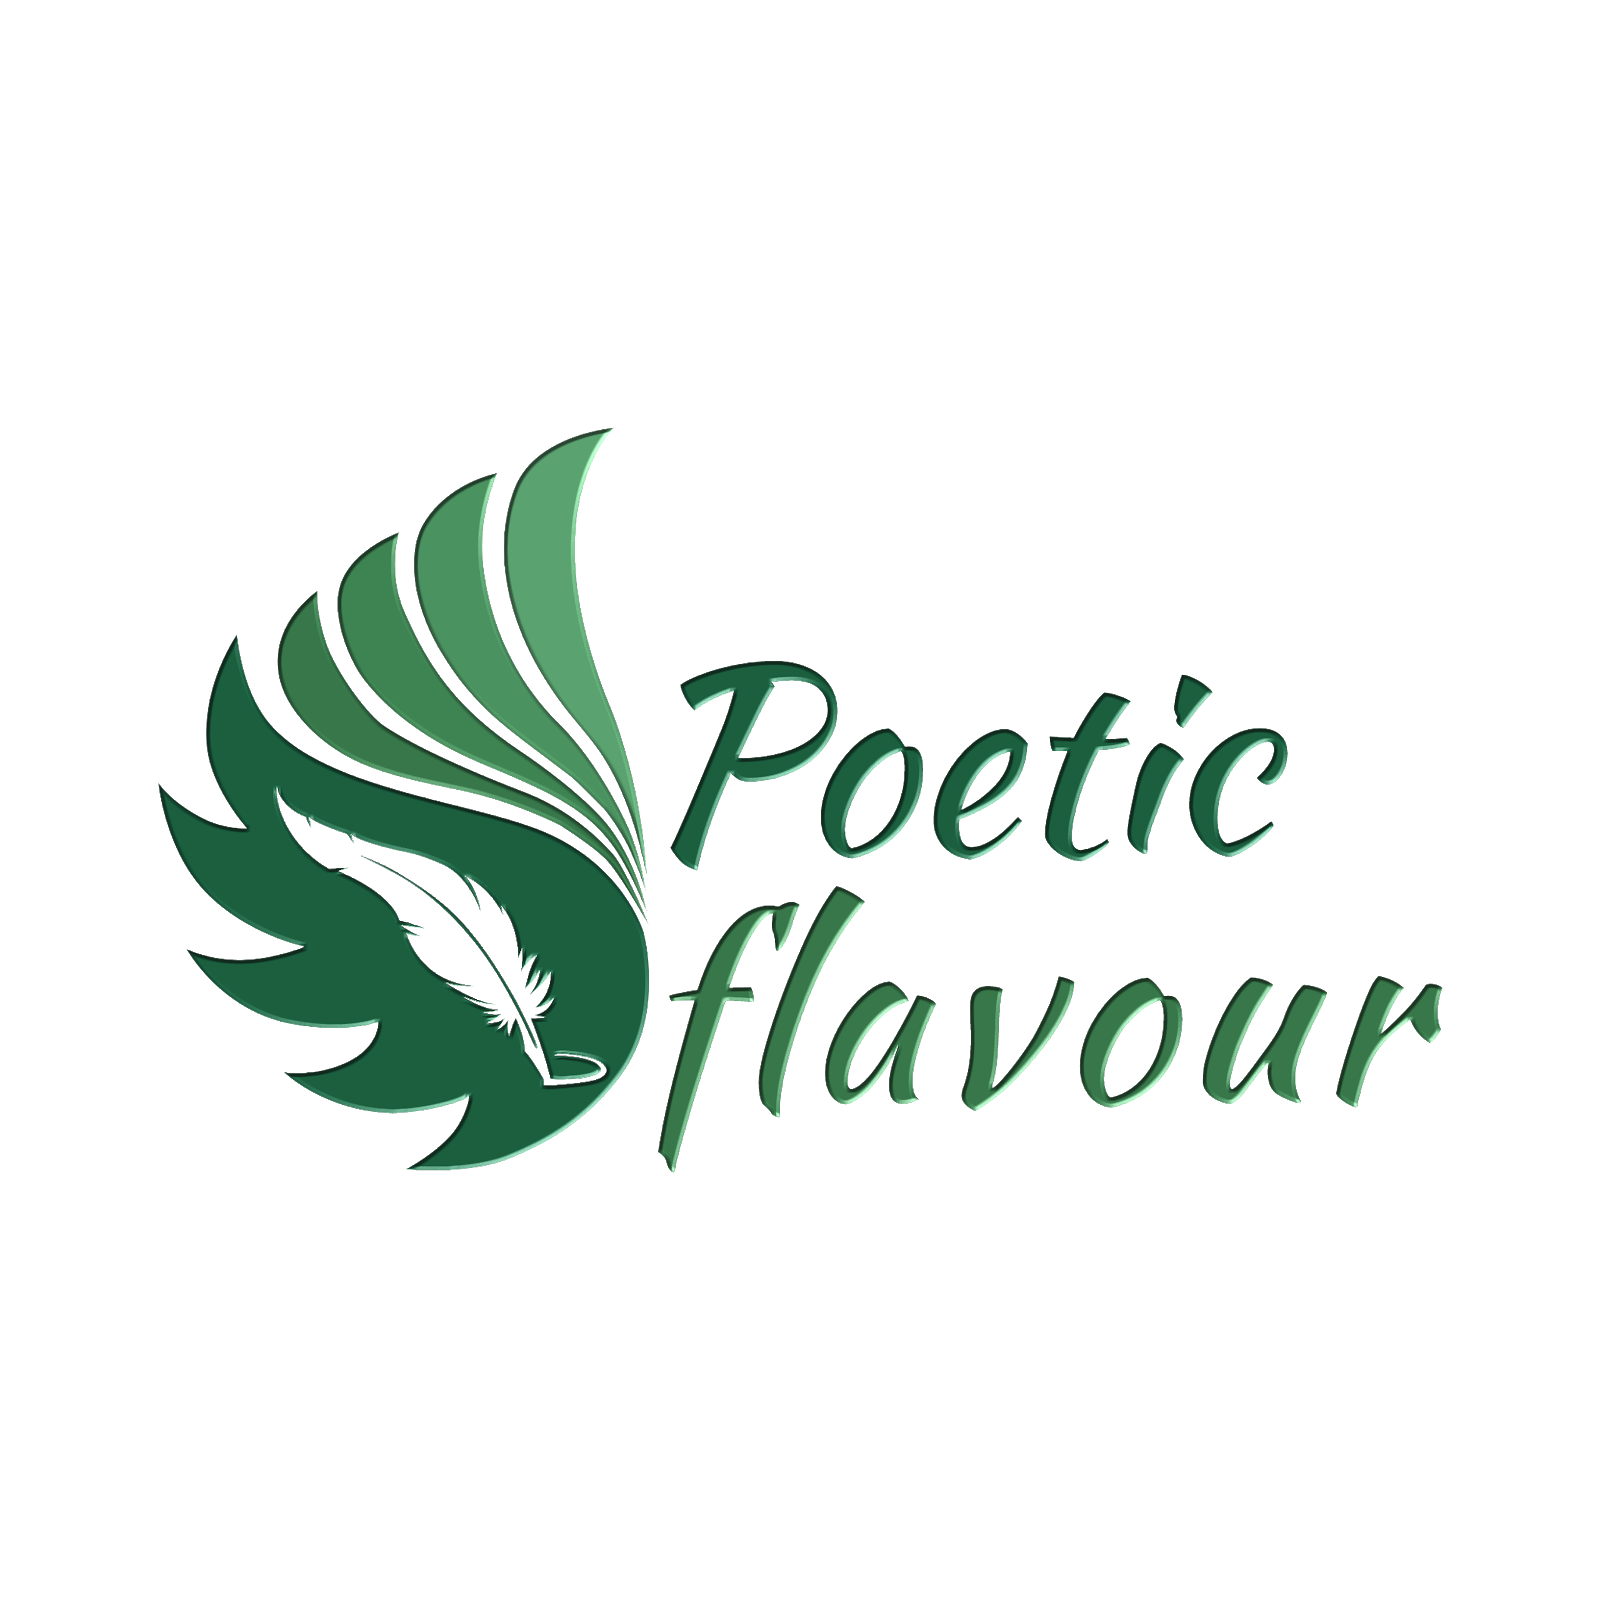 poetic flavour- House of hindi poems and hindi quotes